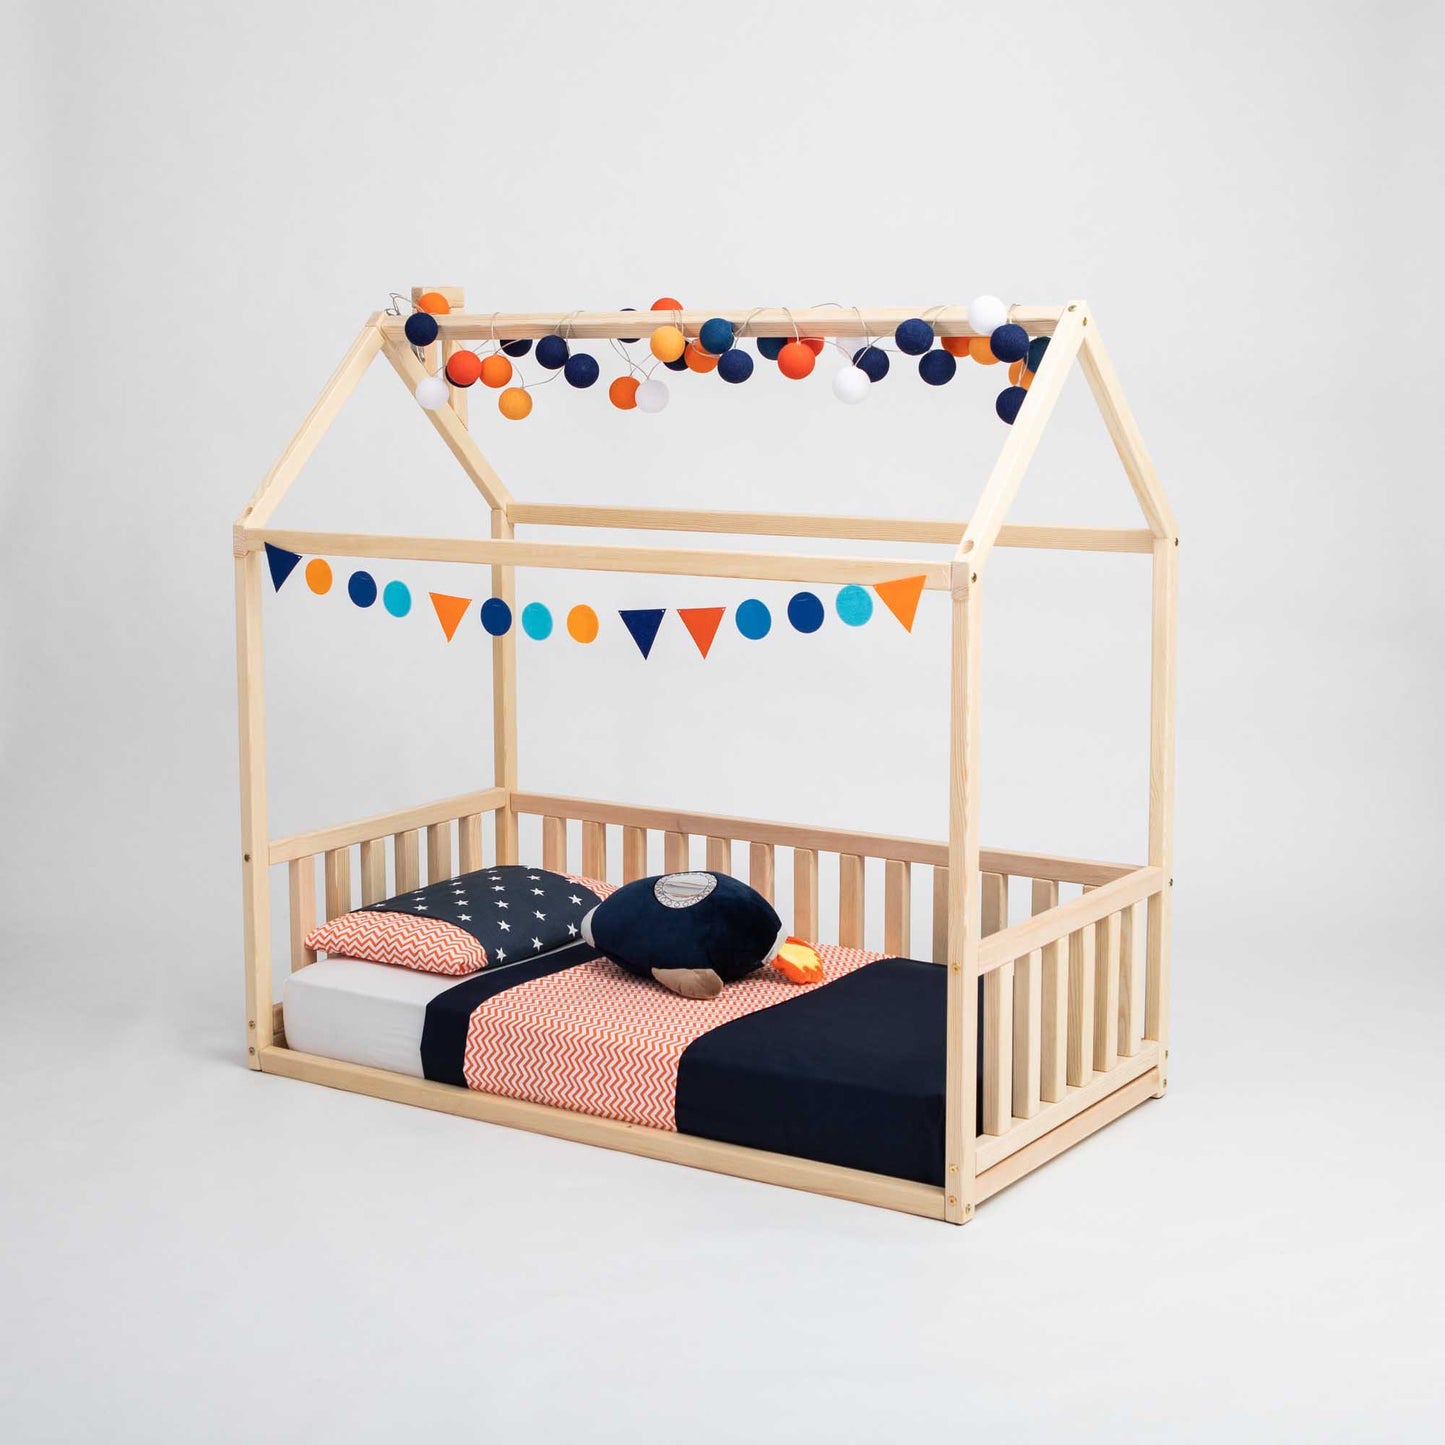 A charming Kids' house-frame bed with 3-sided rails, this wooden toddler bed is shaped like a house and features a house-shaped canopy. It’s beautifully adorned with multicolored bunting, pom-pom garlands, and vibrant blue and orange bedding.